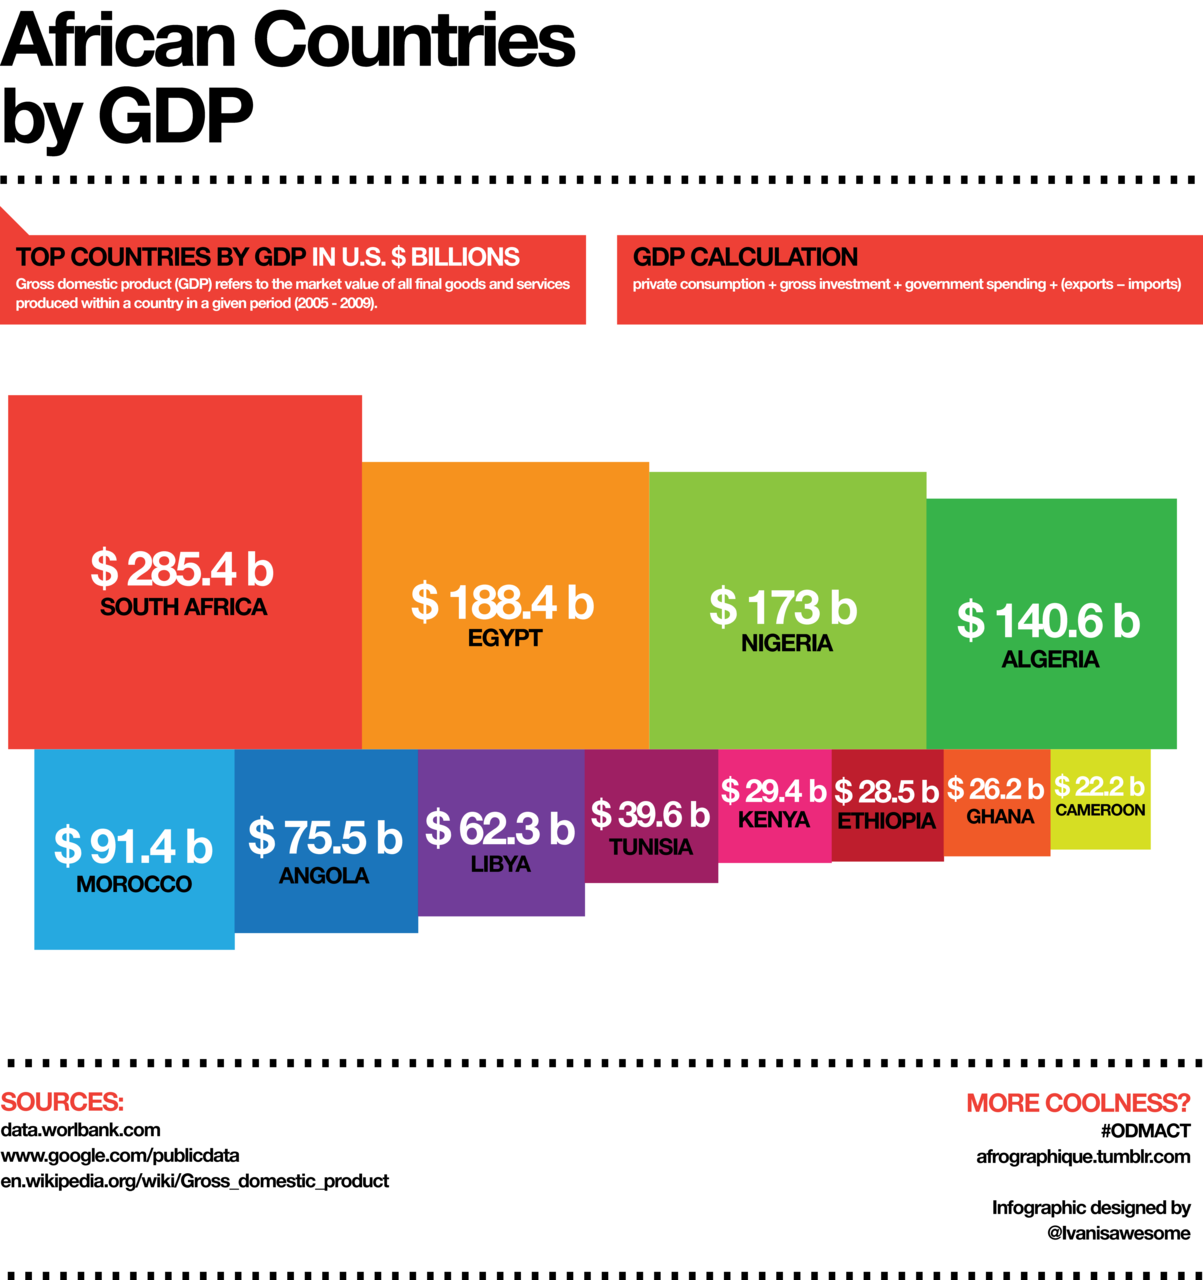 An infographic of the largest African economies by GDP. Data from the World Bank 2005-2009.